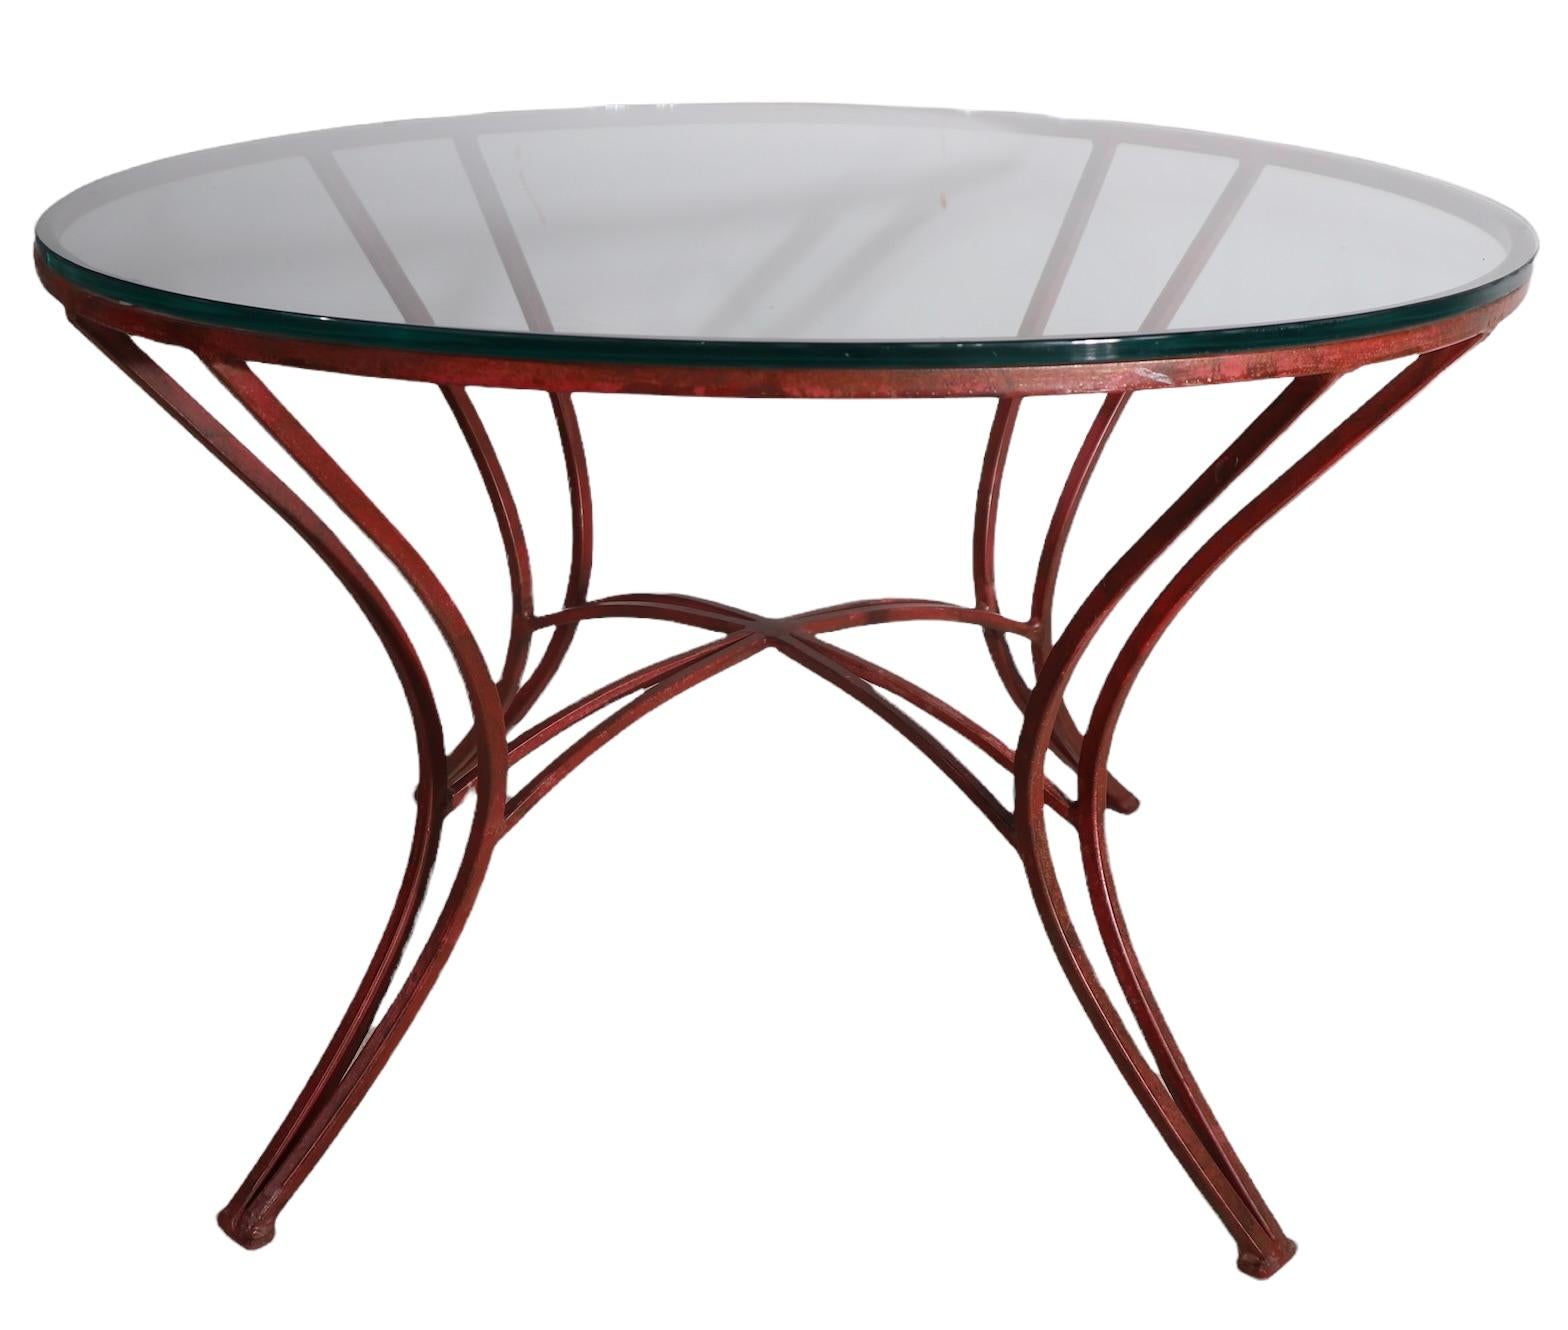 Stylish round side, or end table having an exaggerated and dramatic wrought iron base in intriguing Chinese red paint finish, with a thick plate glass top. The table is in very good, clean, original condition, showing only light cosmetic wear,